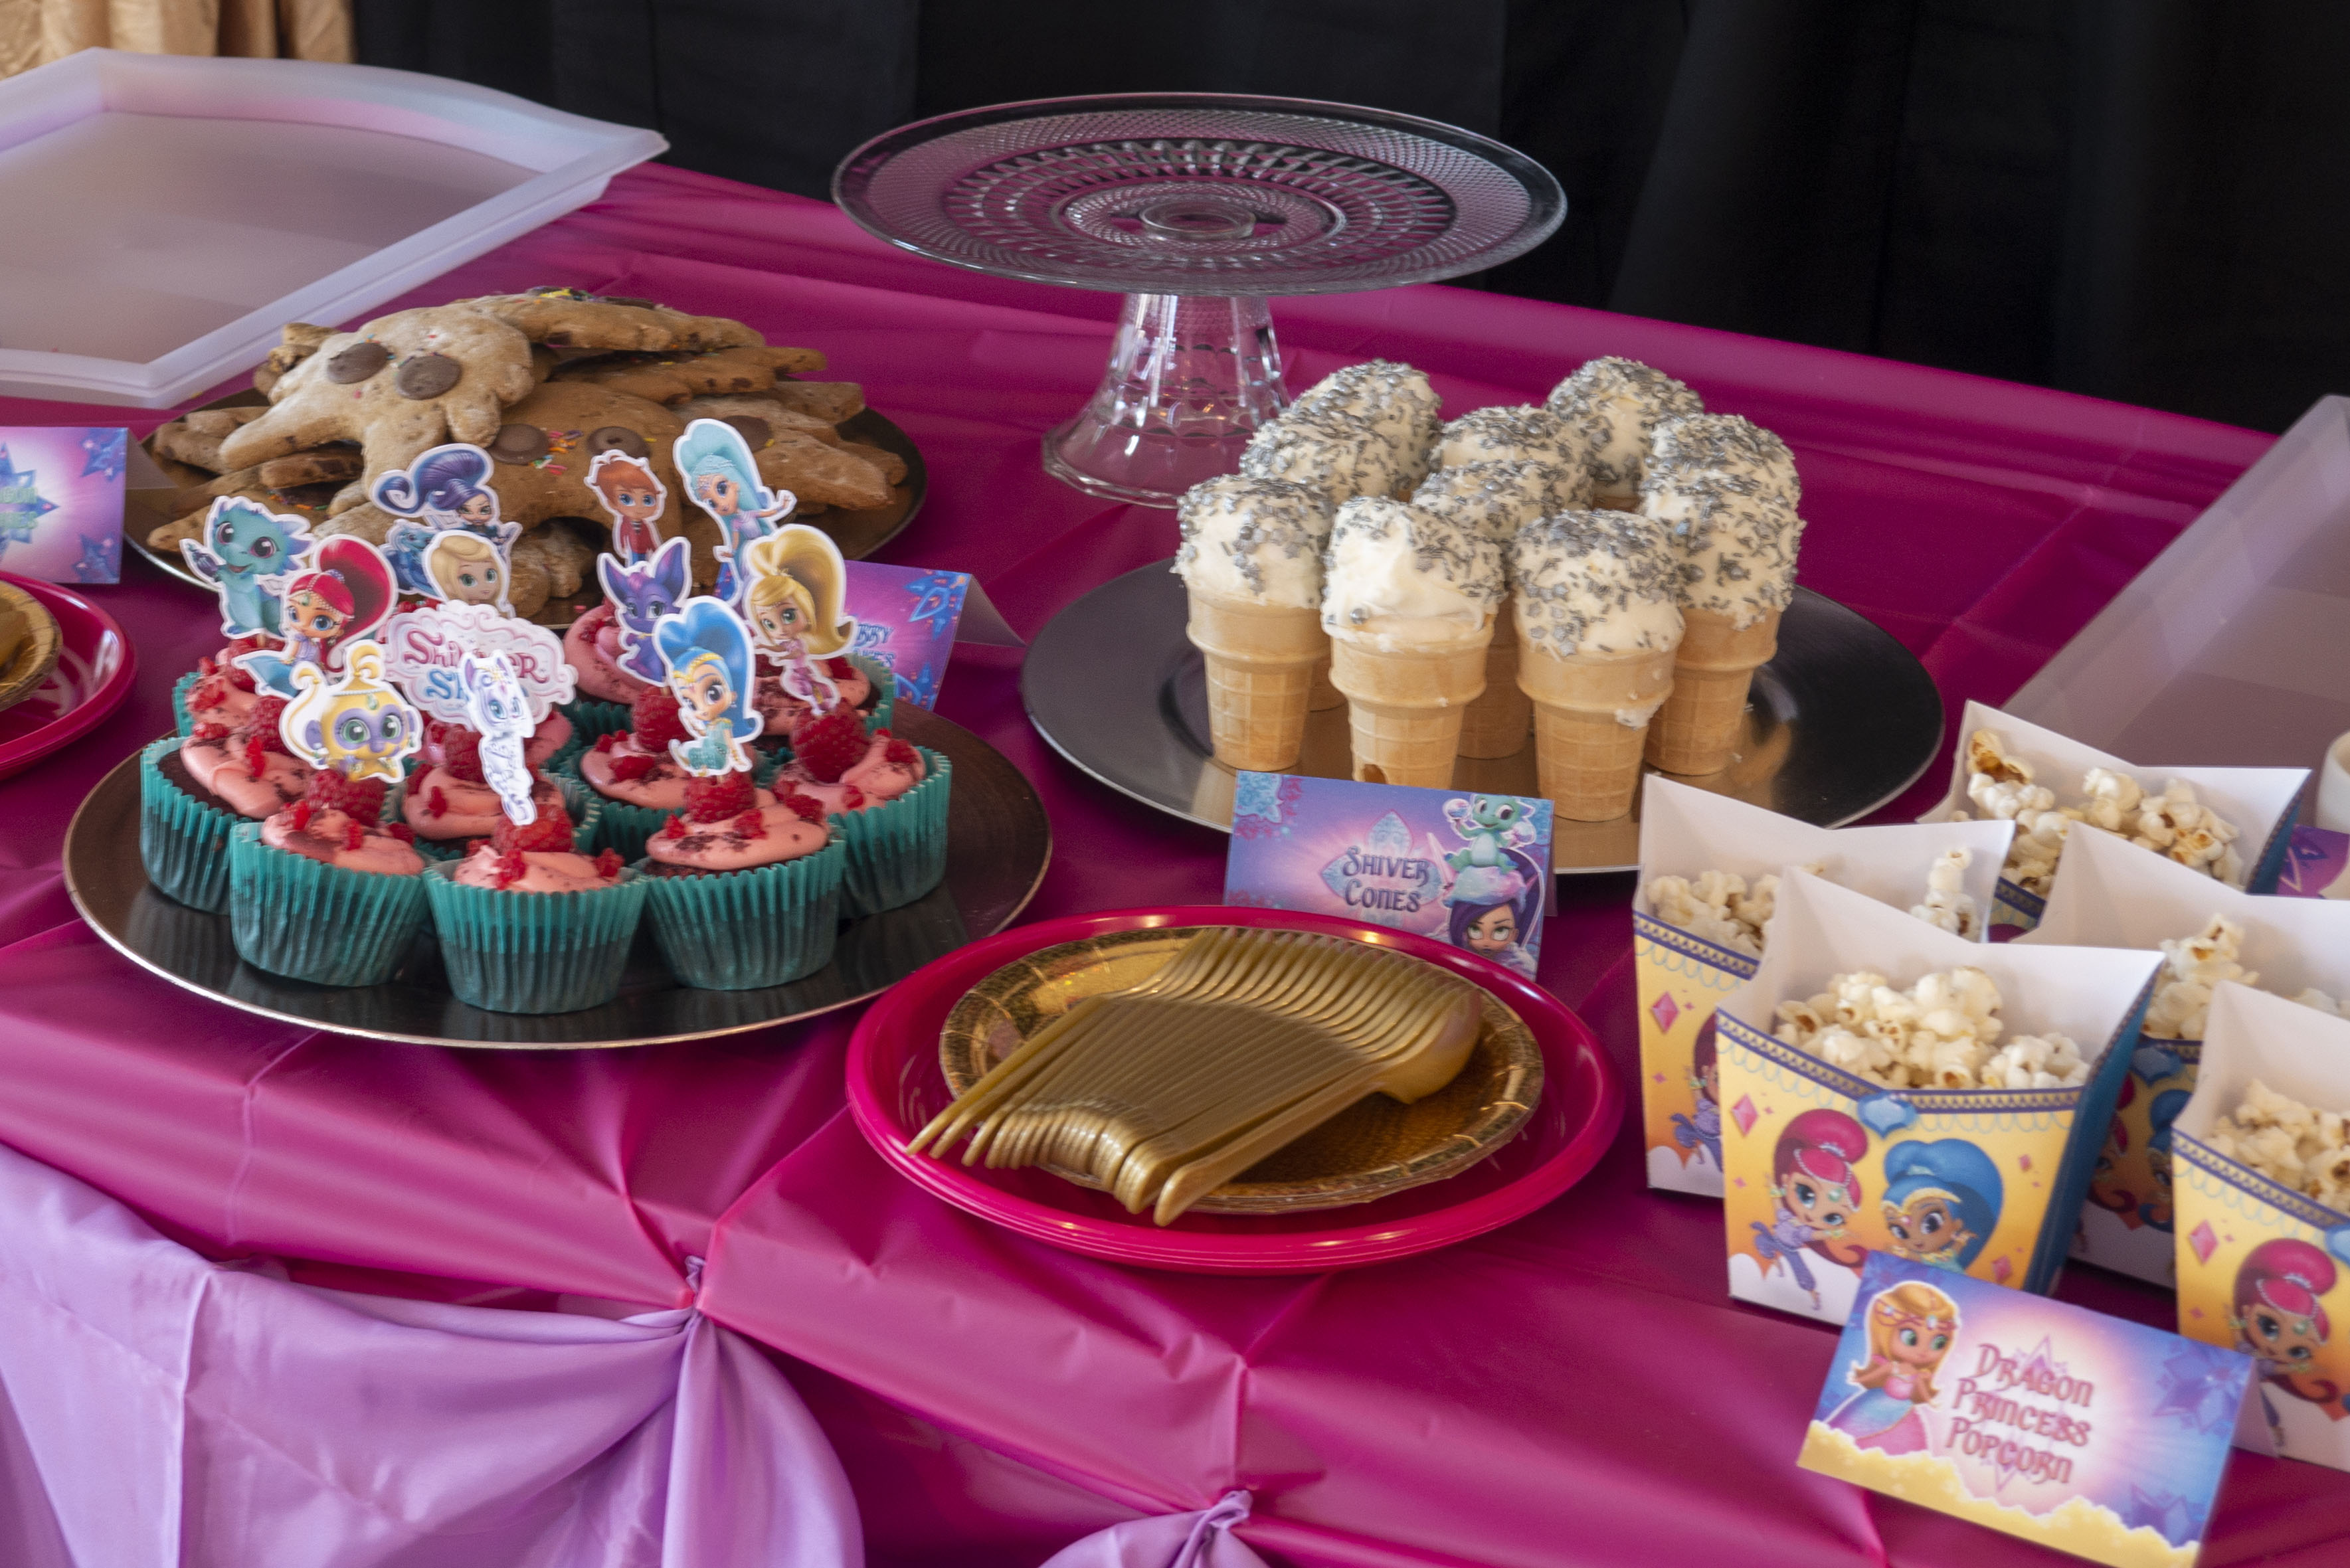 Shimmer and Shine Birthday Party Food Table - Shiver Cones, Frizzleberry Sparkle Cakes and Popcorn